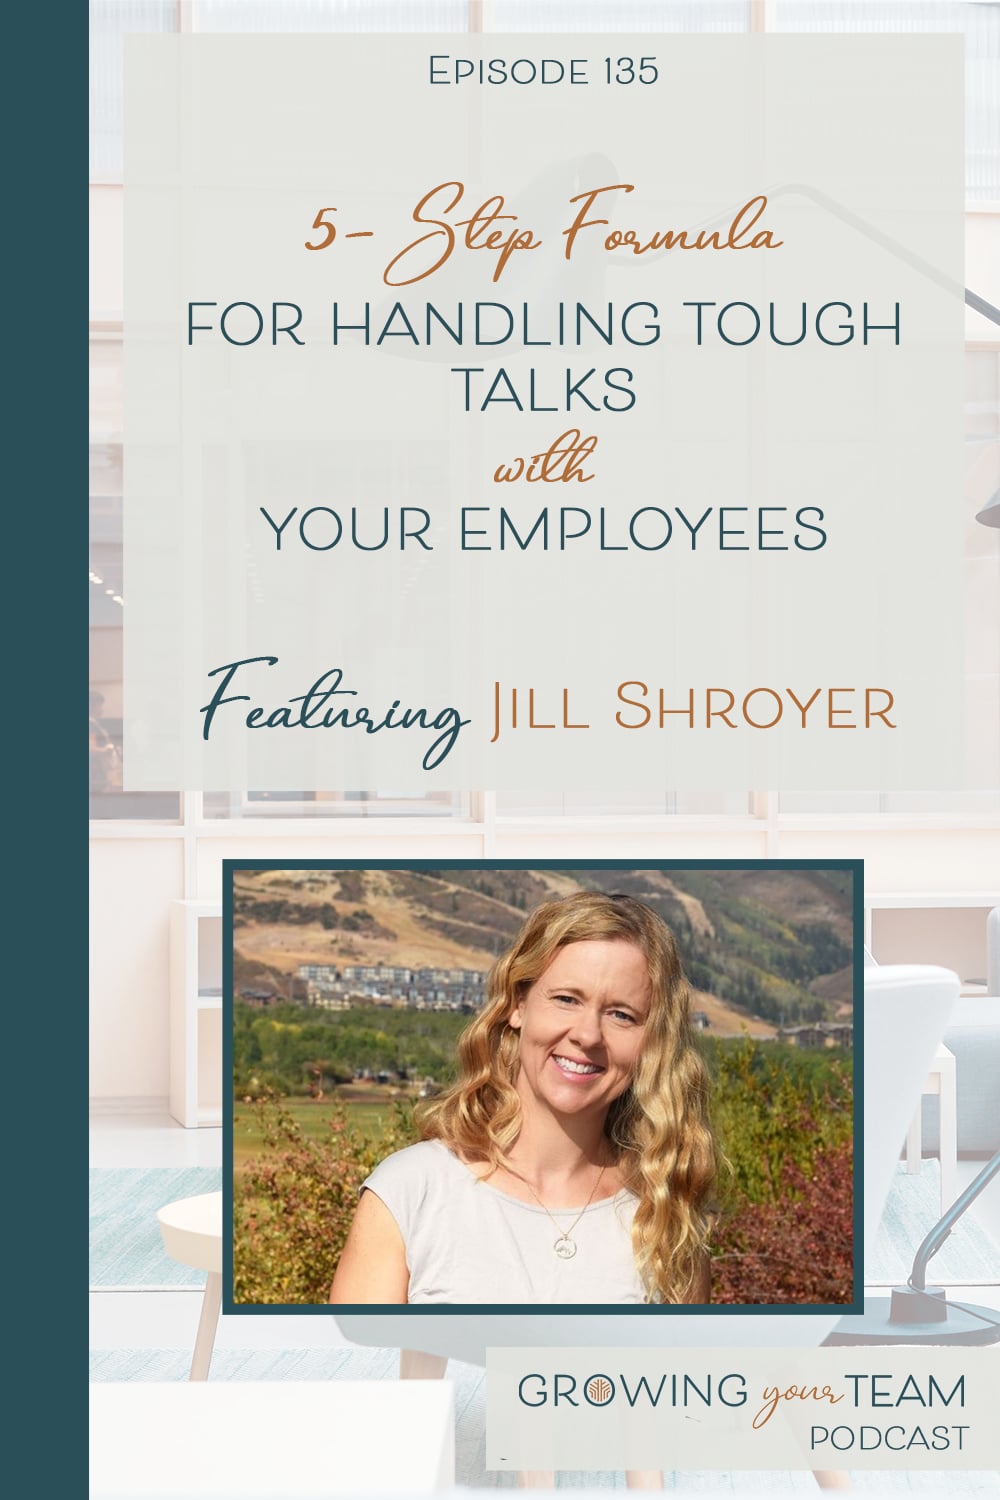 Jill Shroyer, Growing Your Team Podcast, Jamie Van Cuyk, Small Business